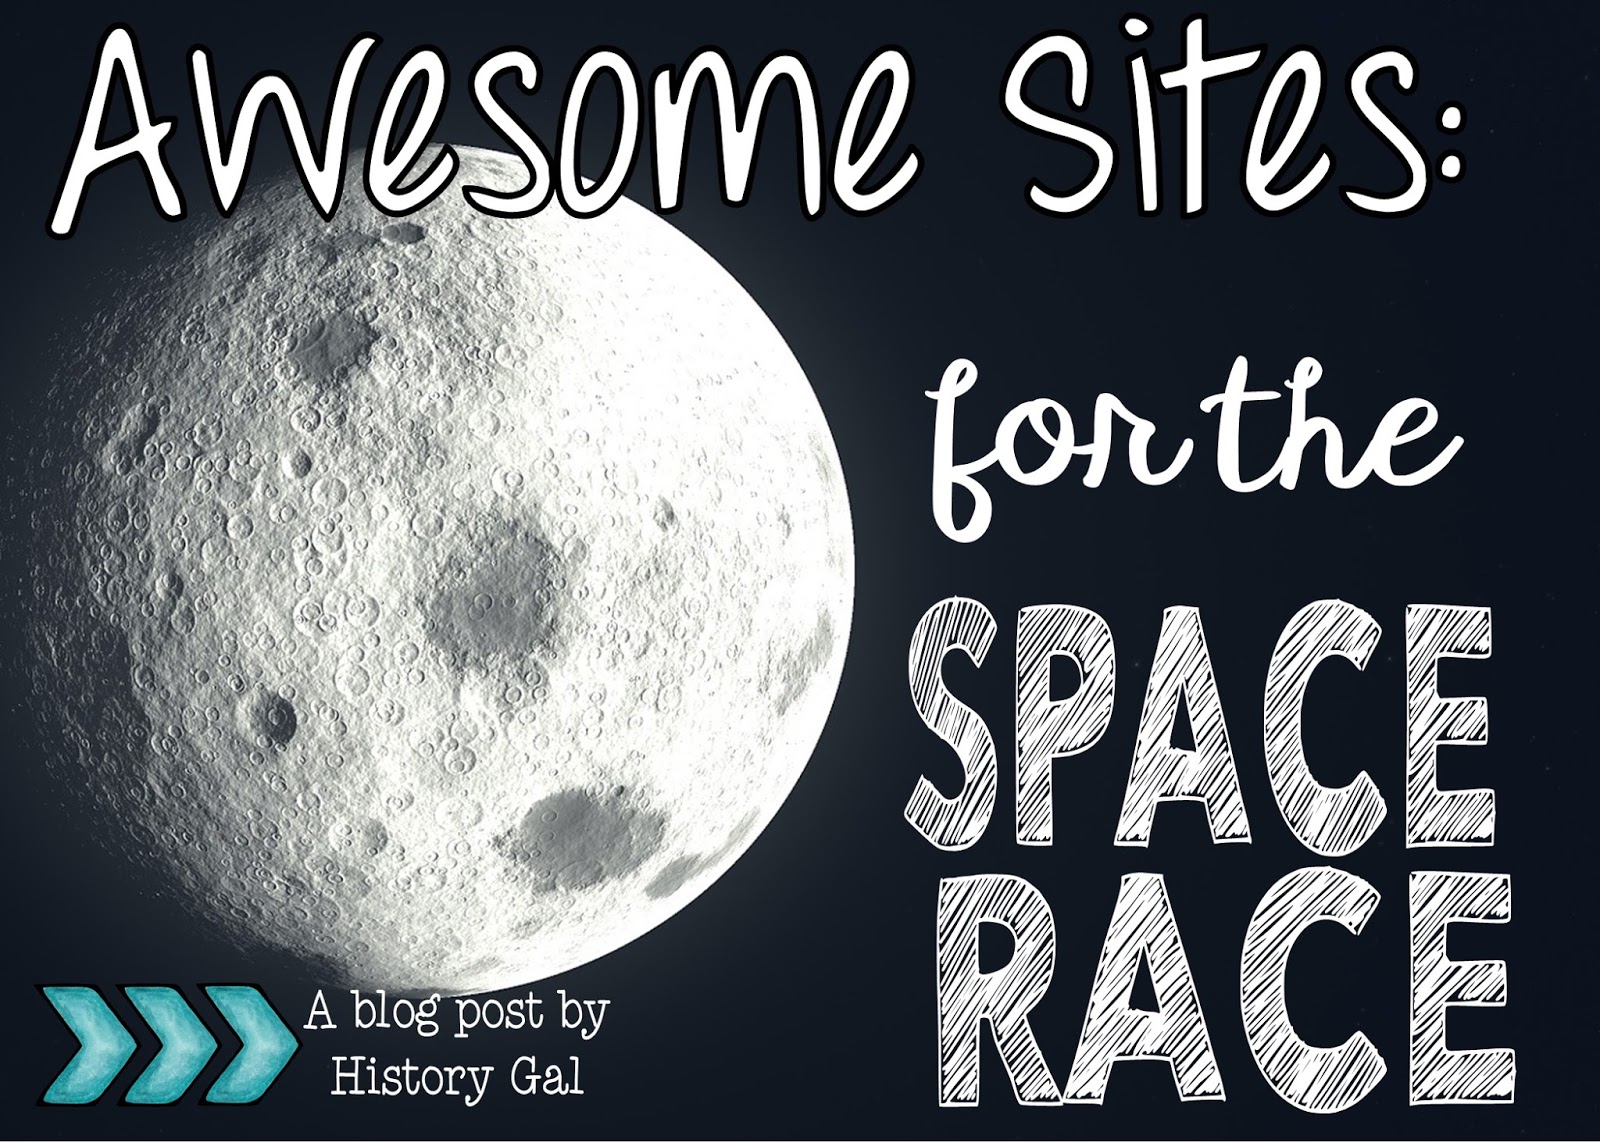 Engaging Sites to Teach the Space Race by History Gal